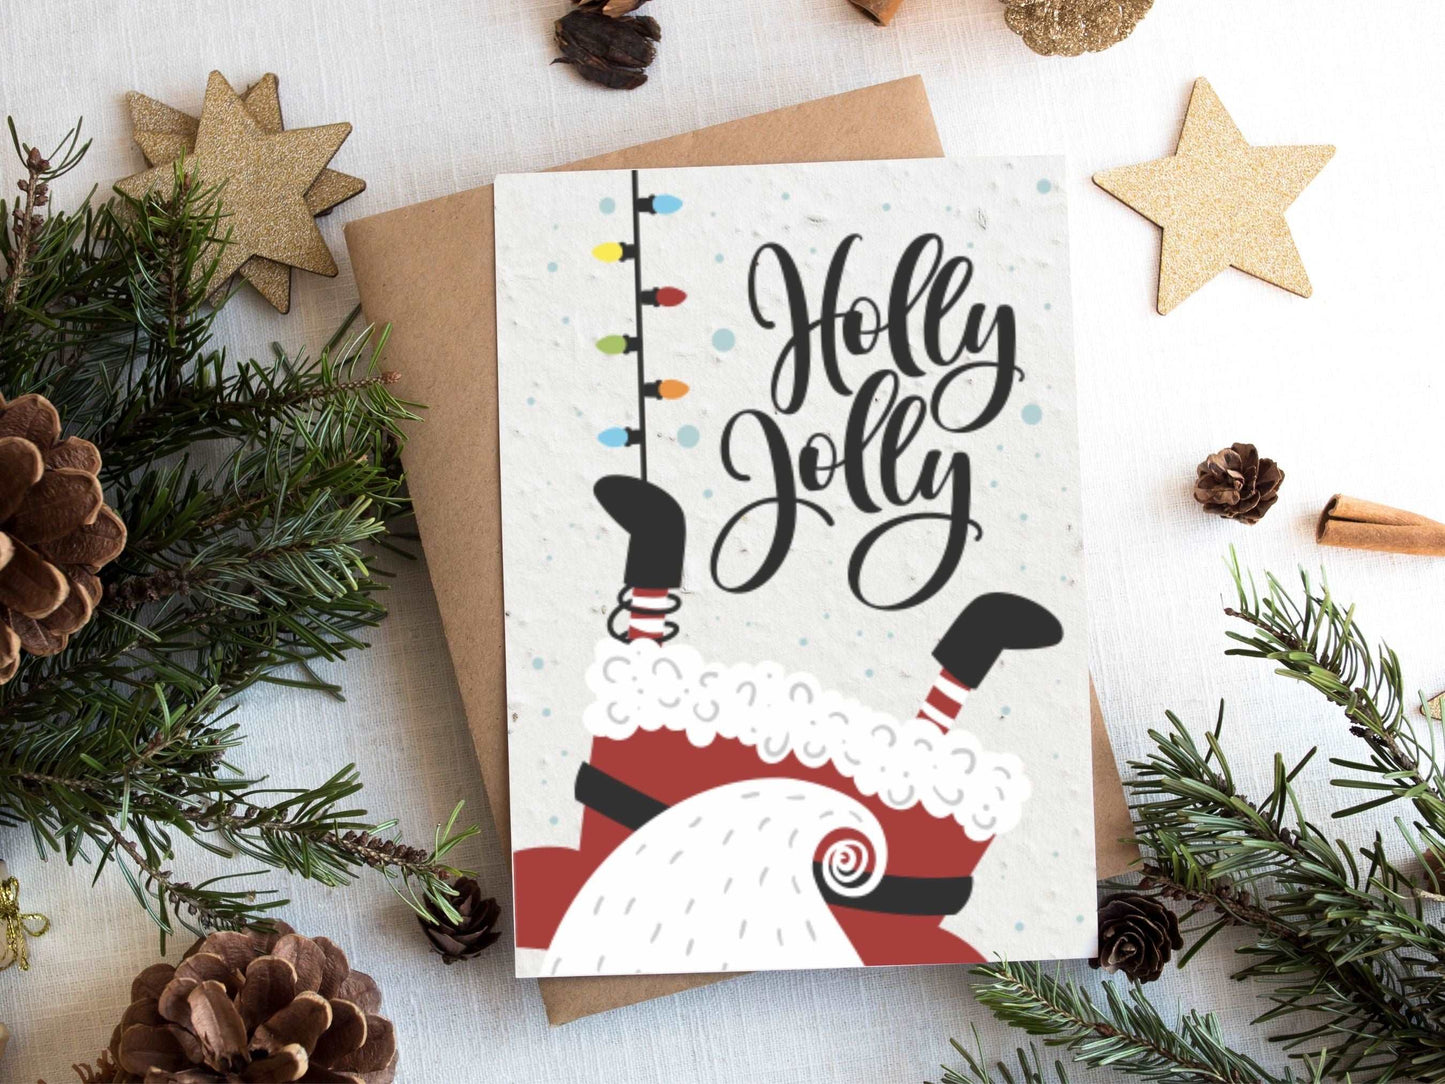 Plantable Seed Paper Christmas Cards 4-Pack - Down the Chimney Greeting Card Little Green Paper Shop